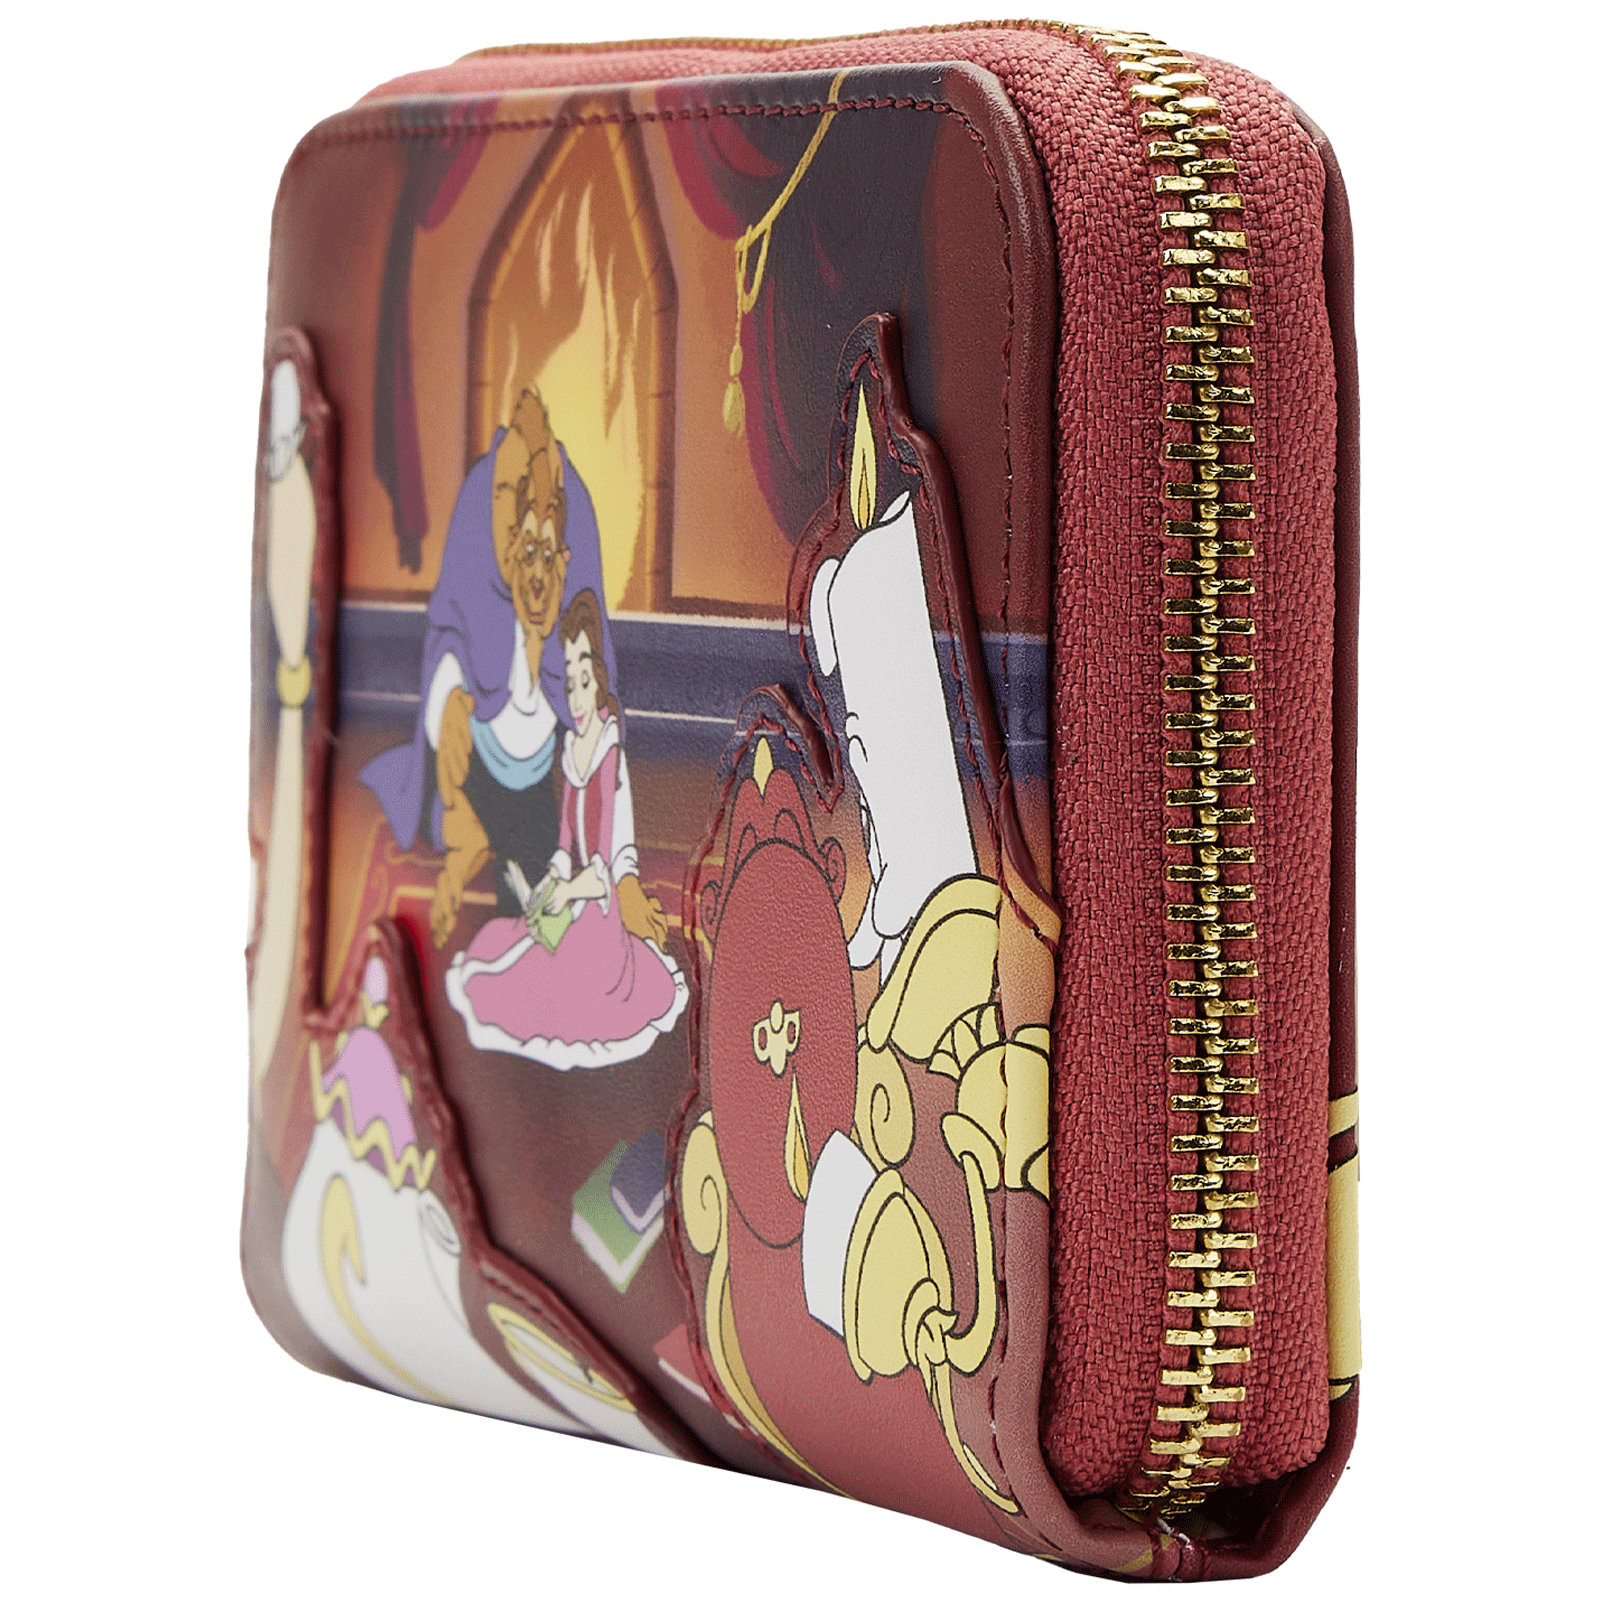 Loungefly x Disney Beauty and the Beast Fireplace Scene Wallet - GeekCore